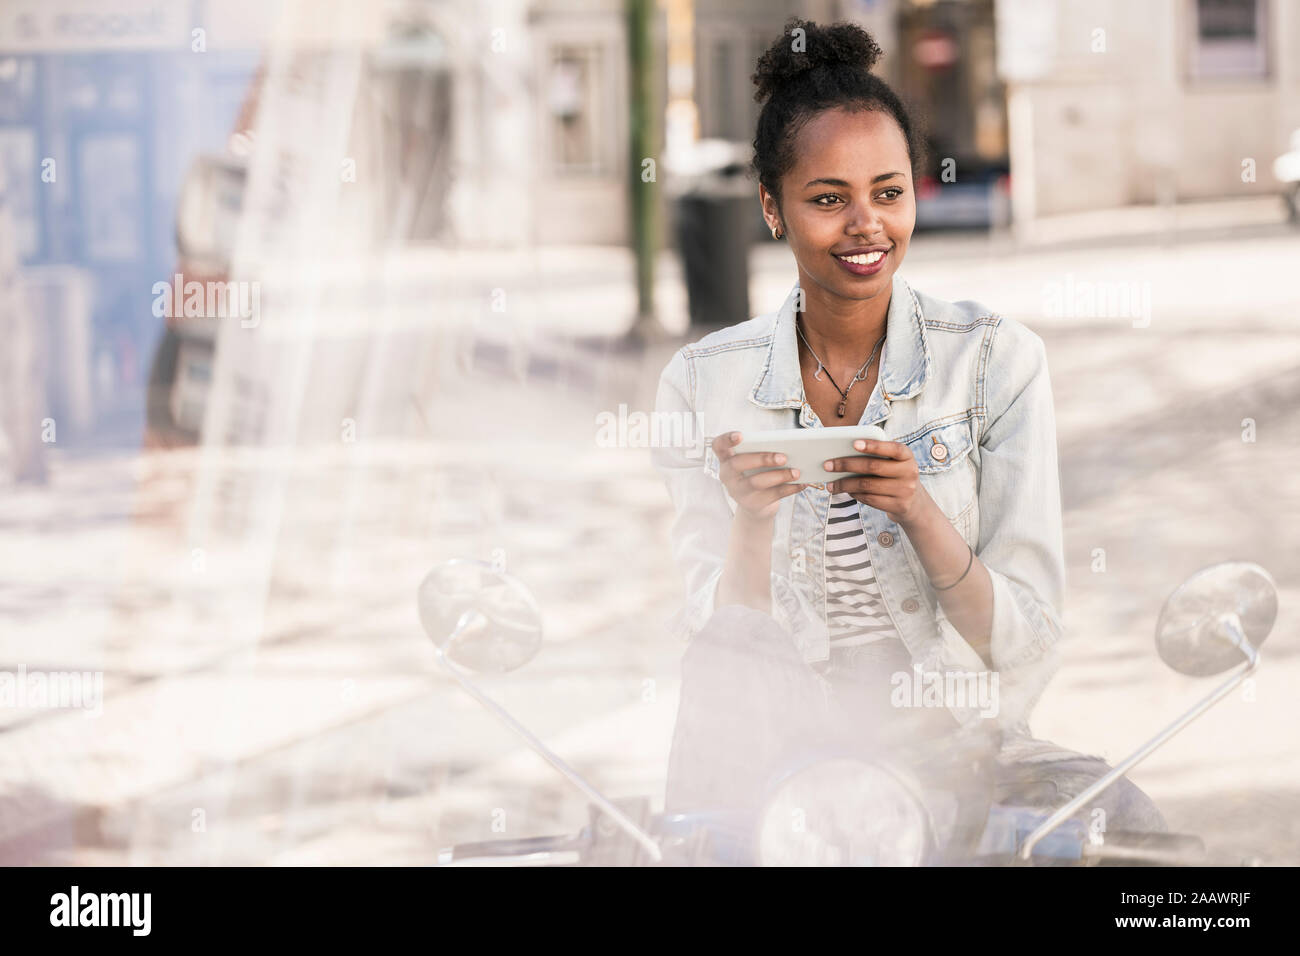 Smiling young woman with motor scooter and mobile phone in the city, Lisbon, Portugal Stock Photo